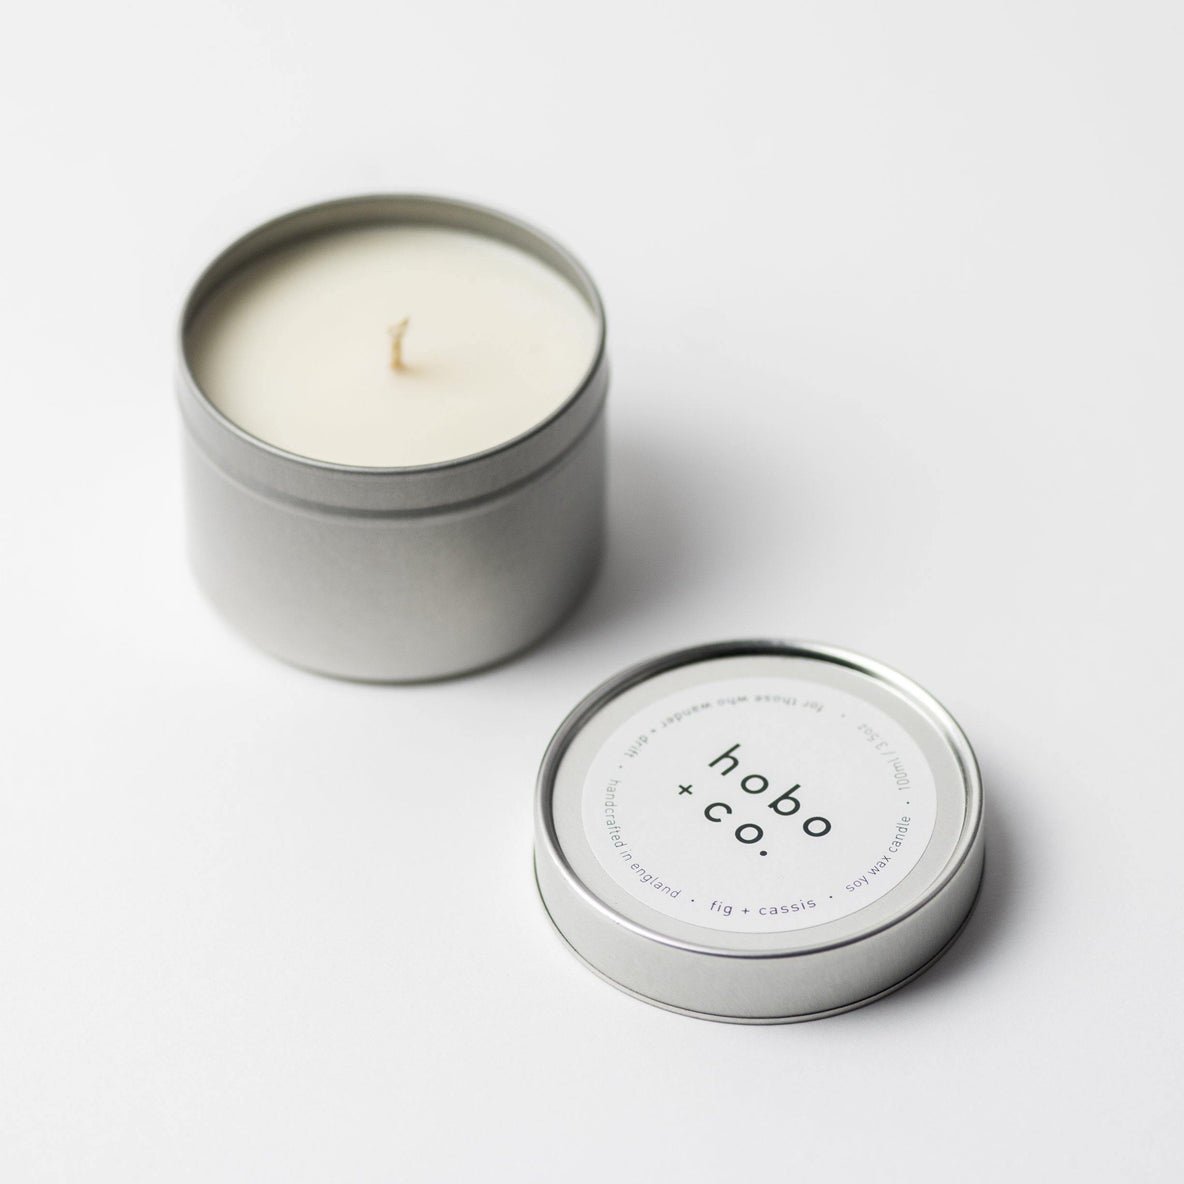 Fig + Cassis Travel Tin Soy Candle - IOSOI Skin Lab